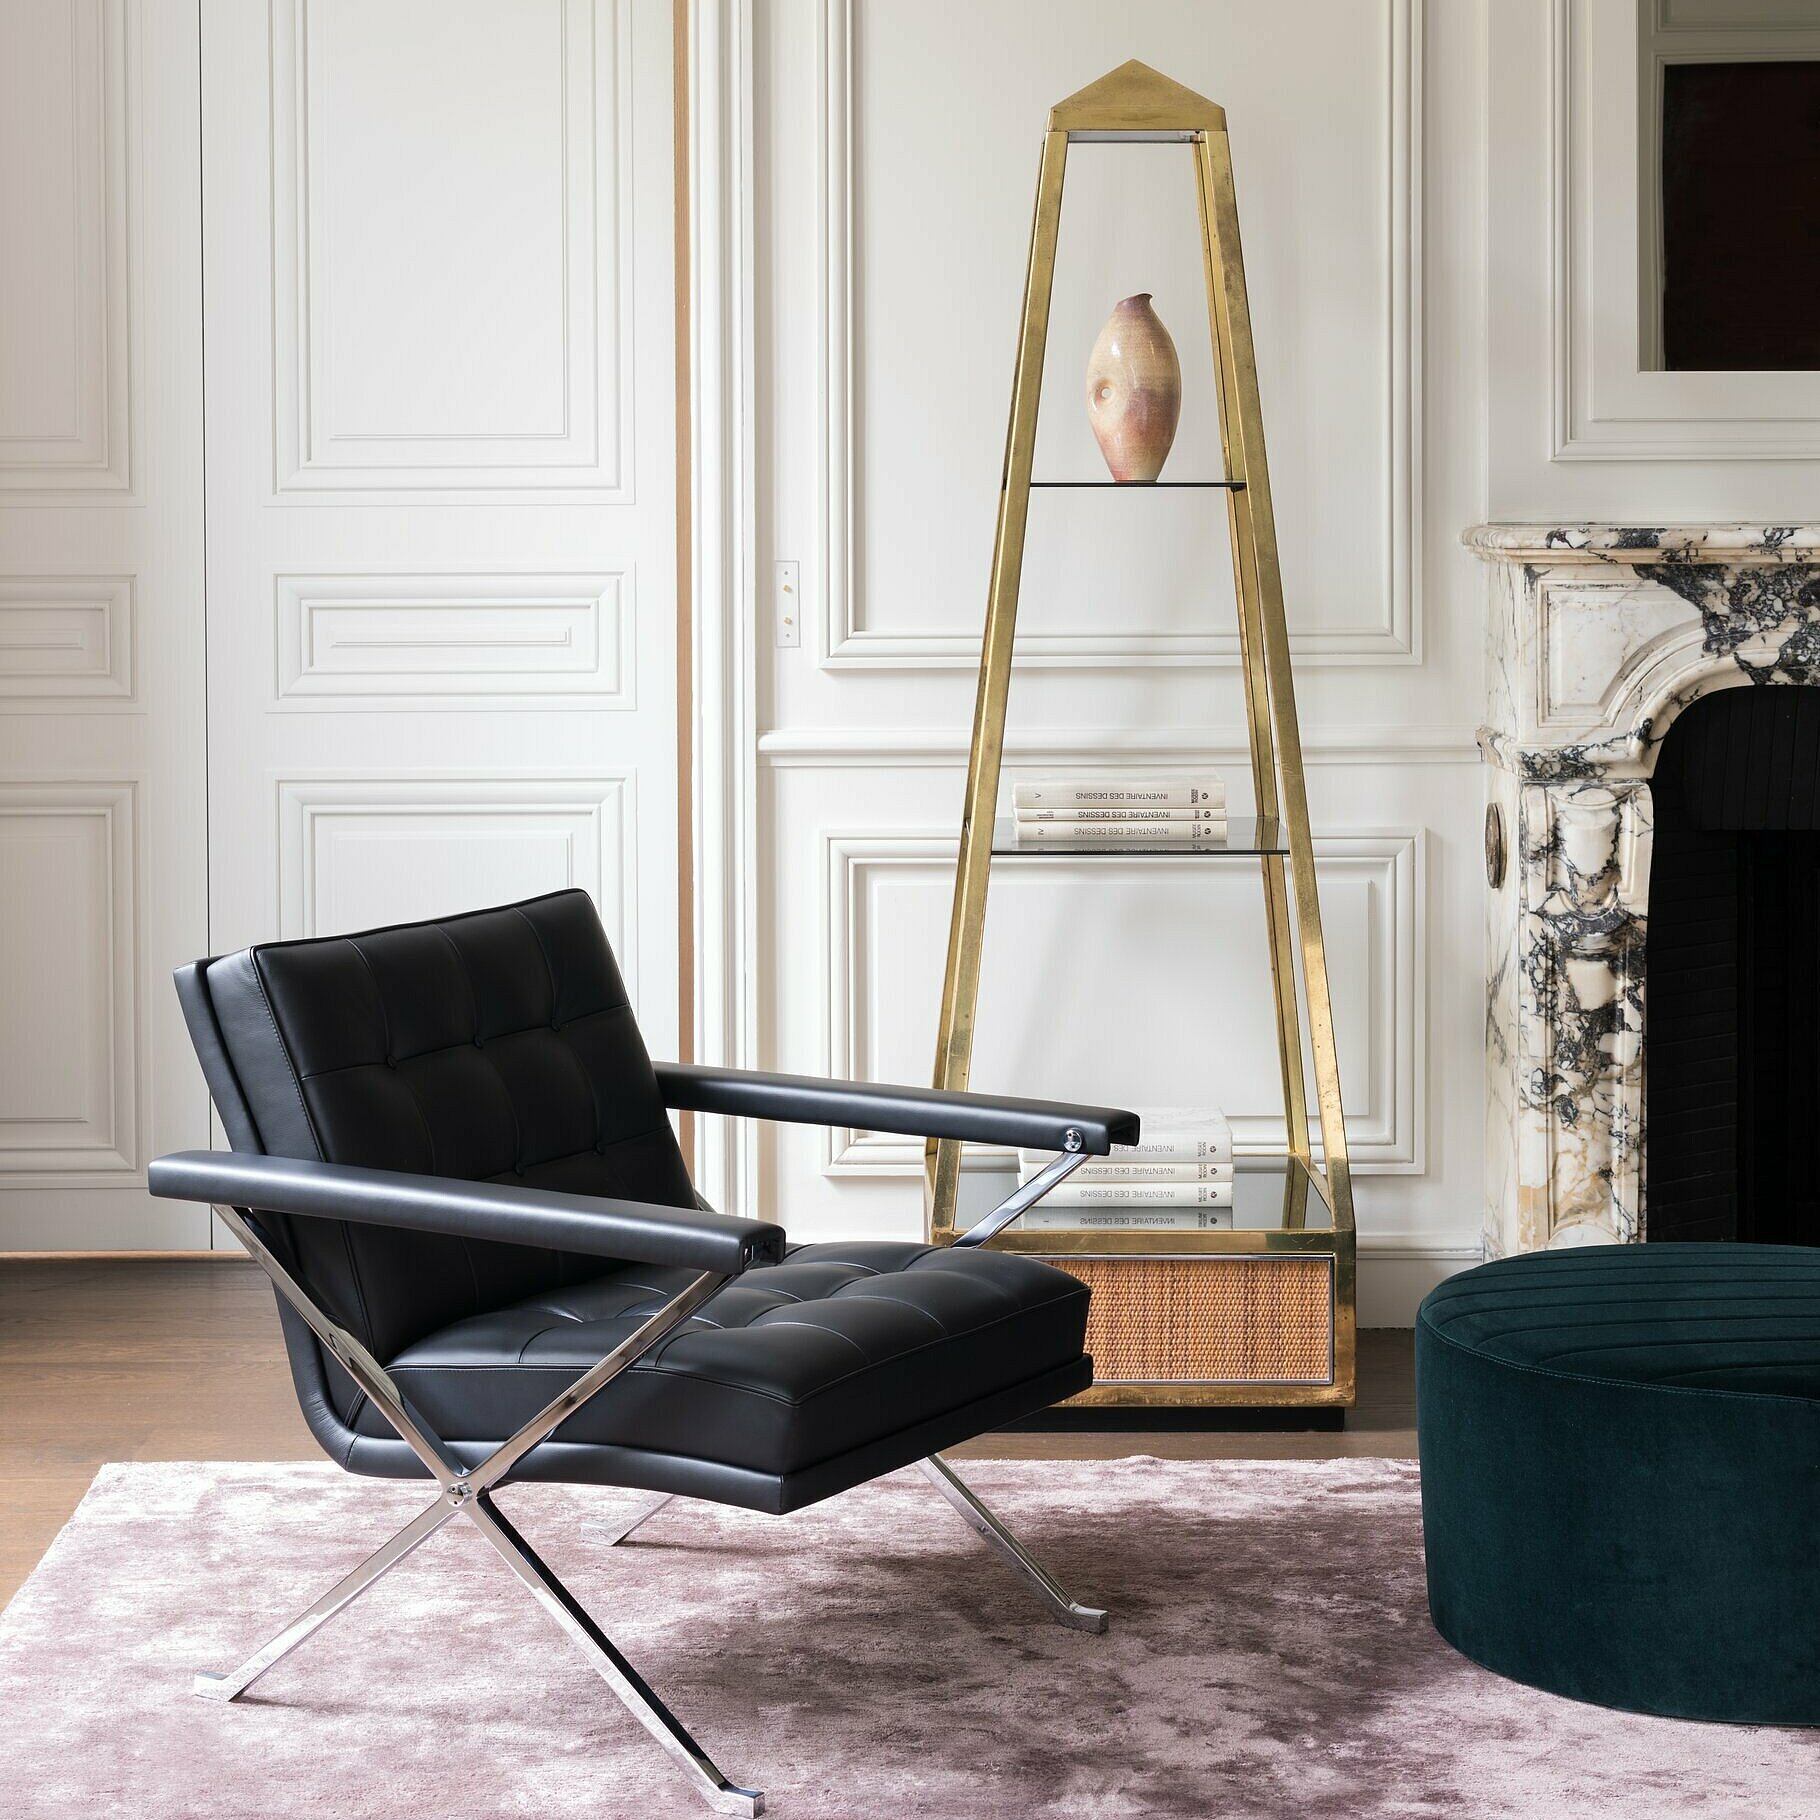 classic Constanze armchair in black leather and shiny chrome frame